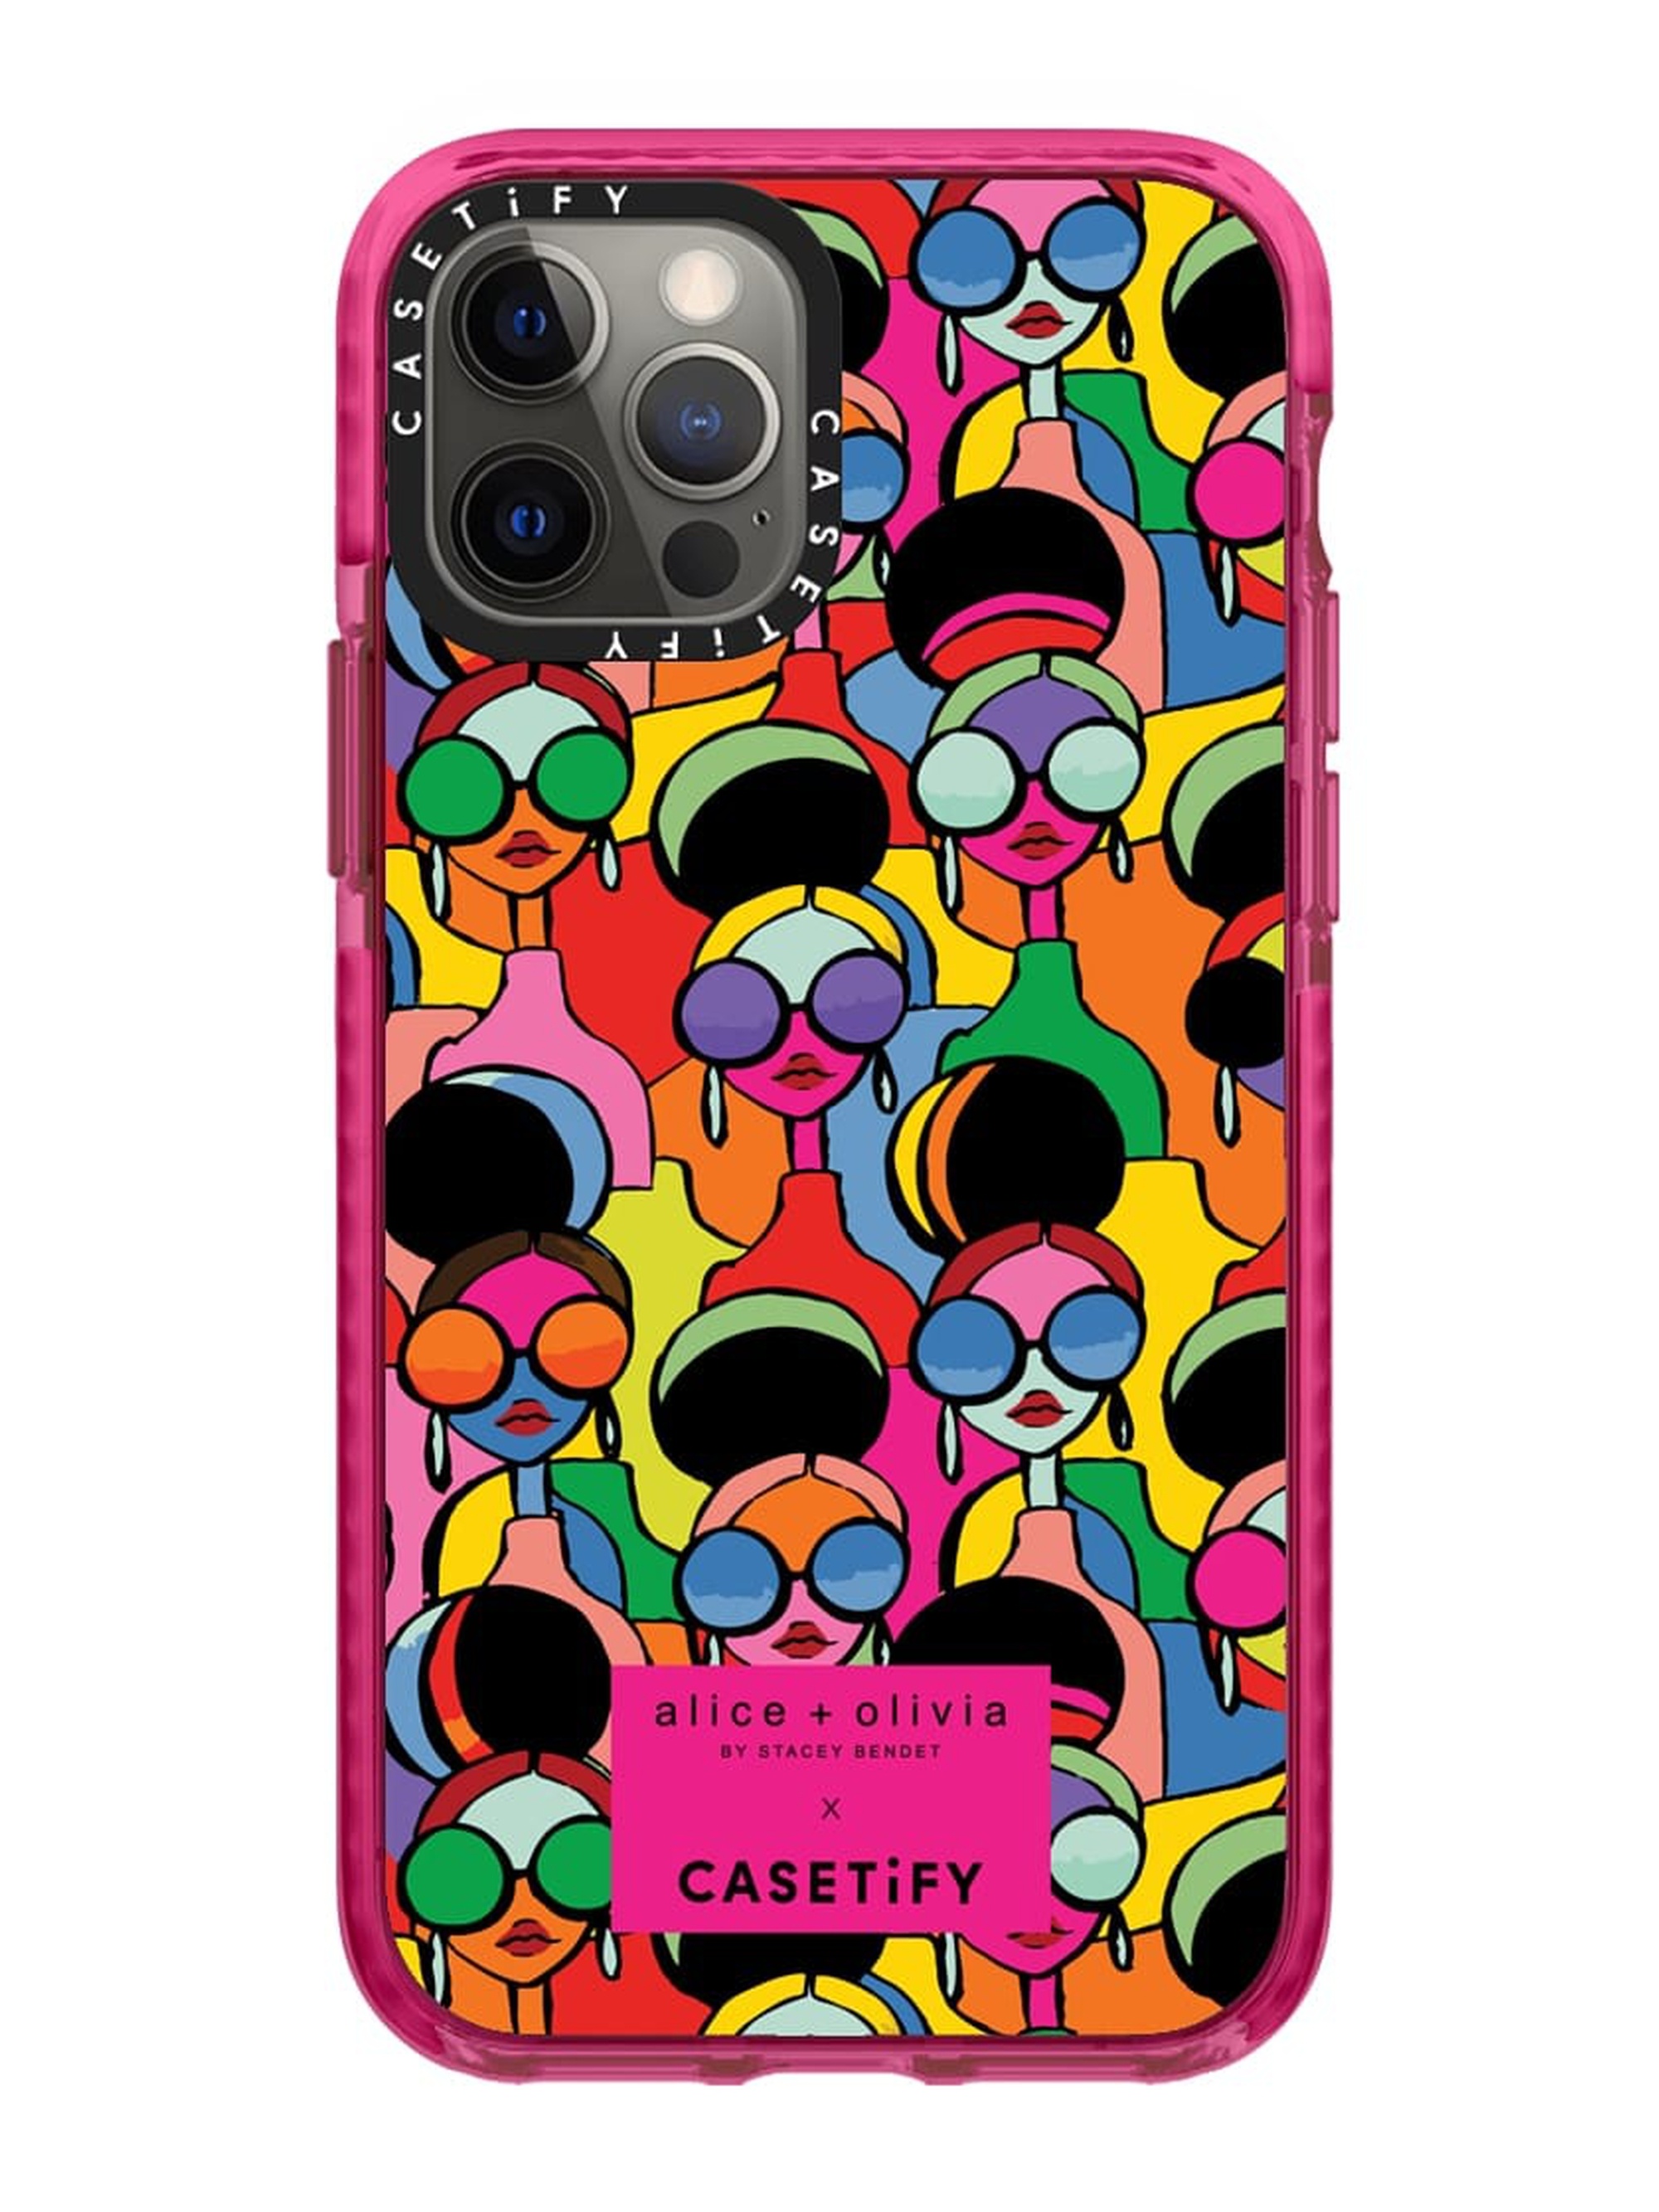 A+O X CASETIFY IPHONE 12 PRO CASE - 2